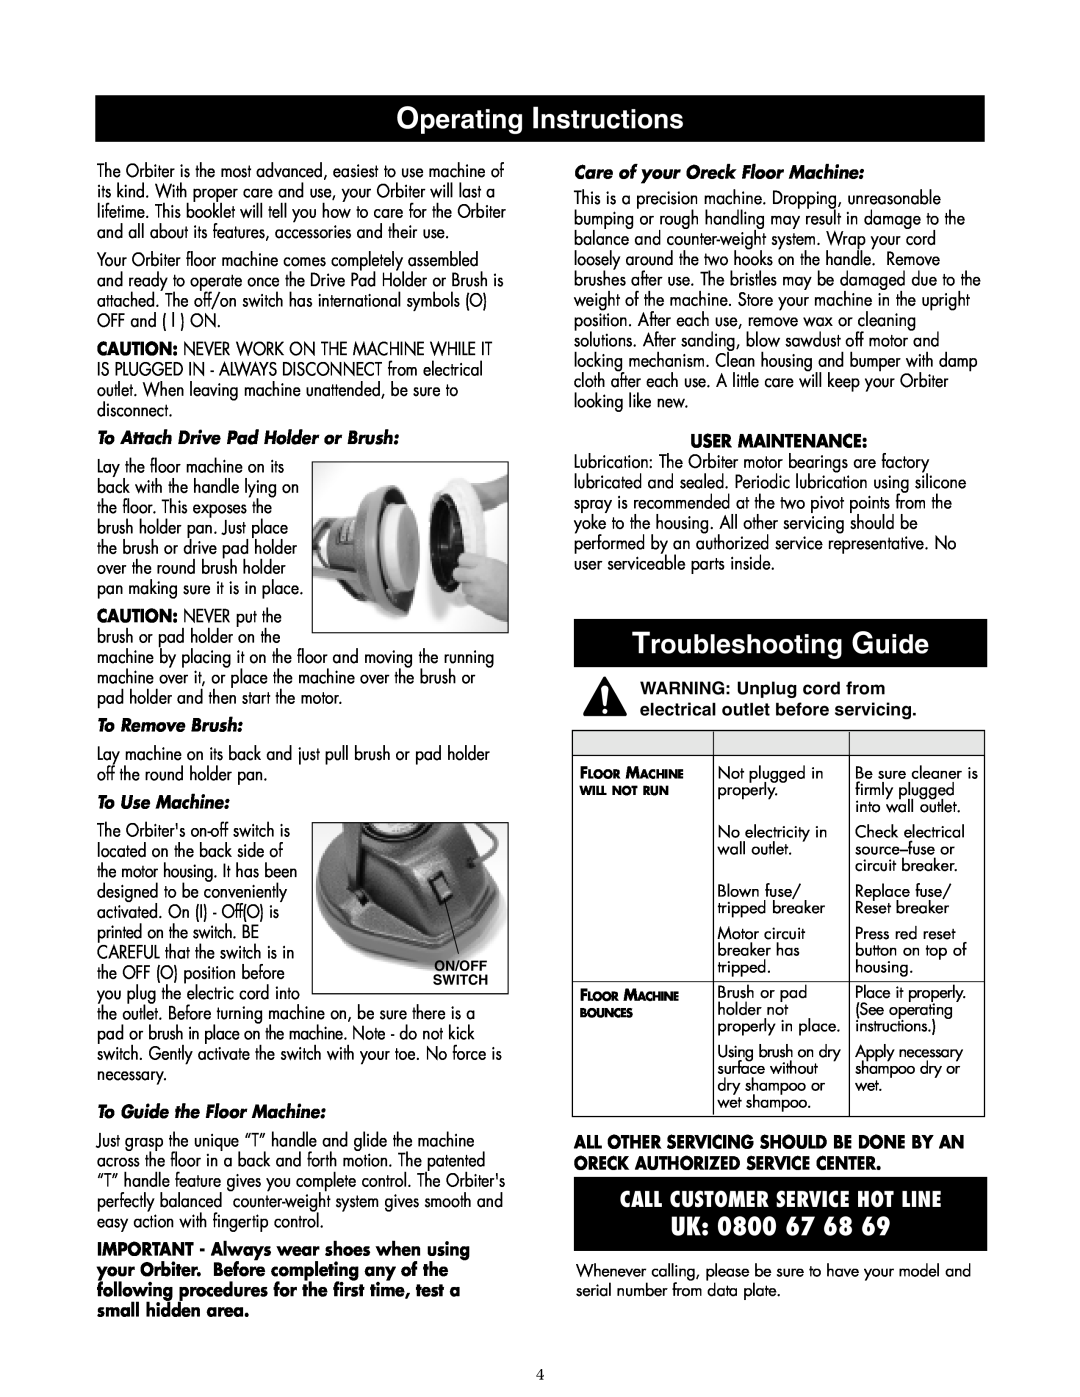 Oreck ORB480 Operating Instructions, Troubleshooting Guide, Uk, To Attach Drive Pad Holder or Brush, To Remove Brush 